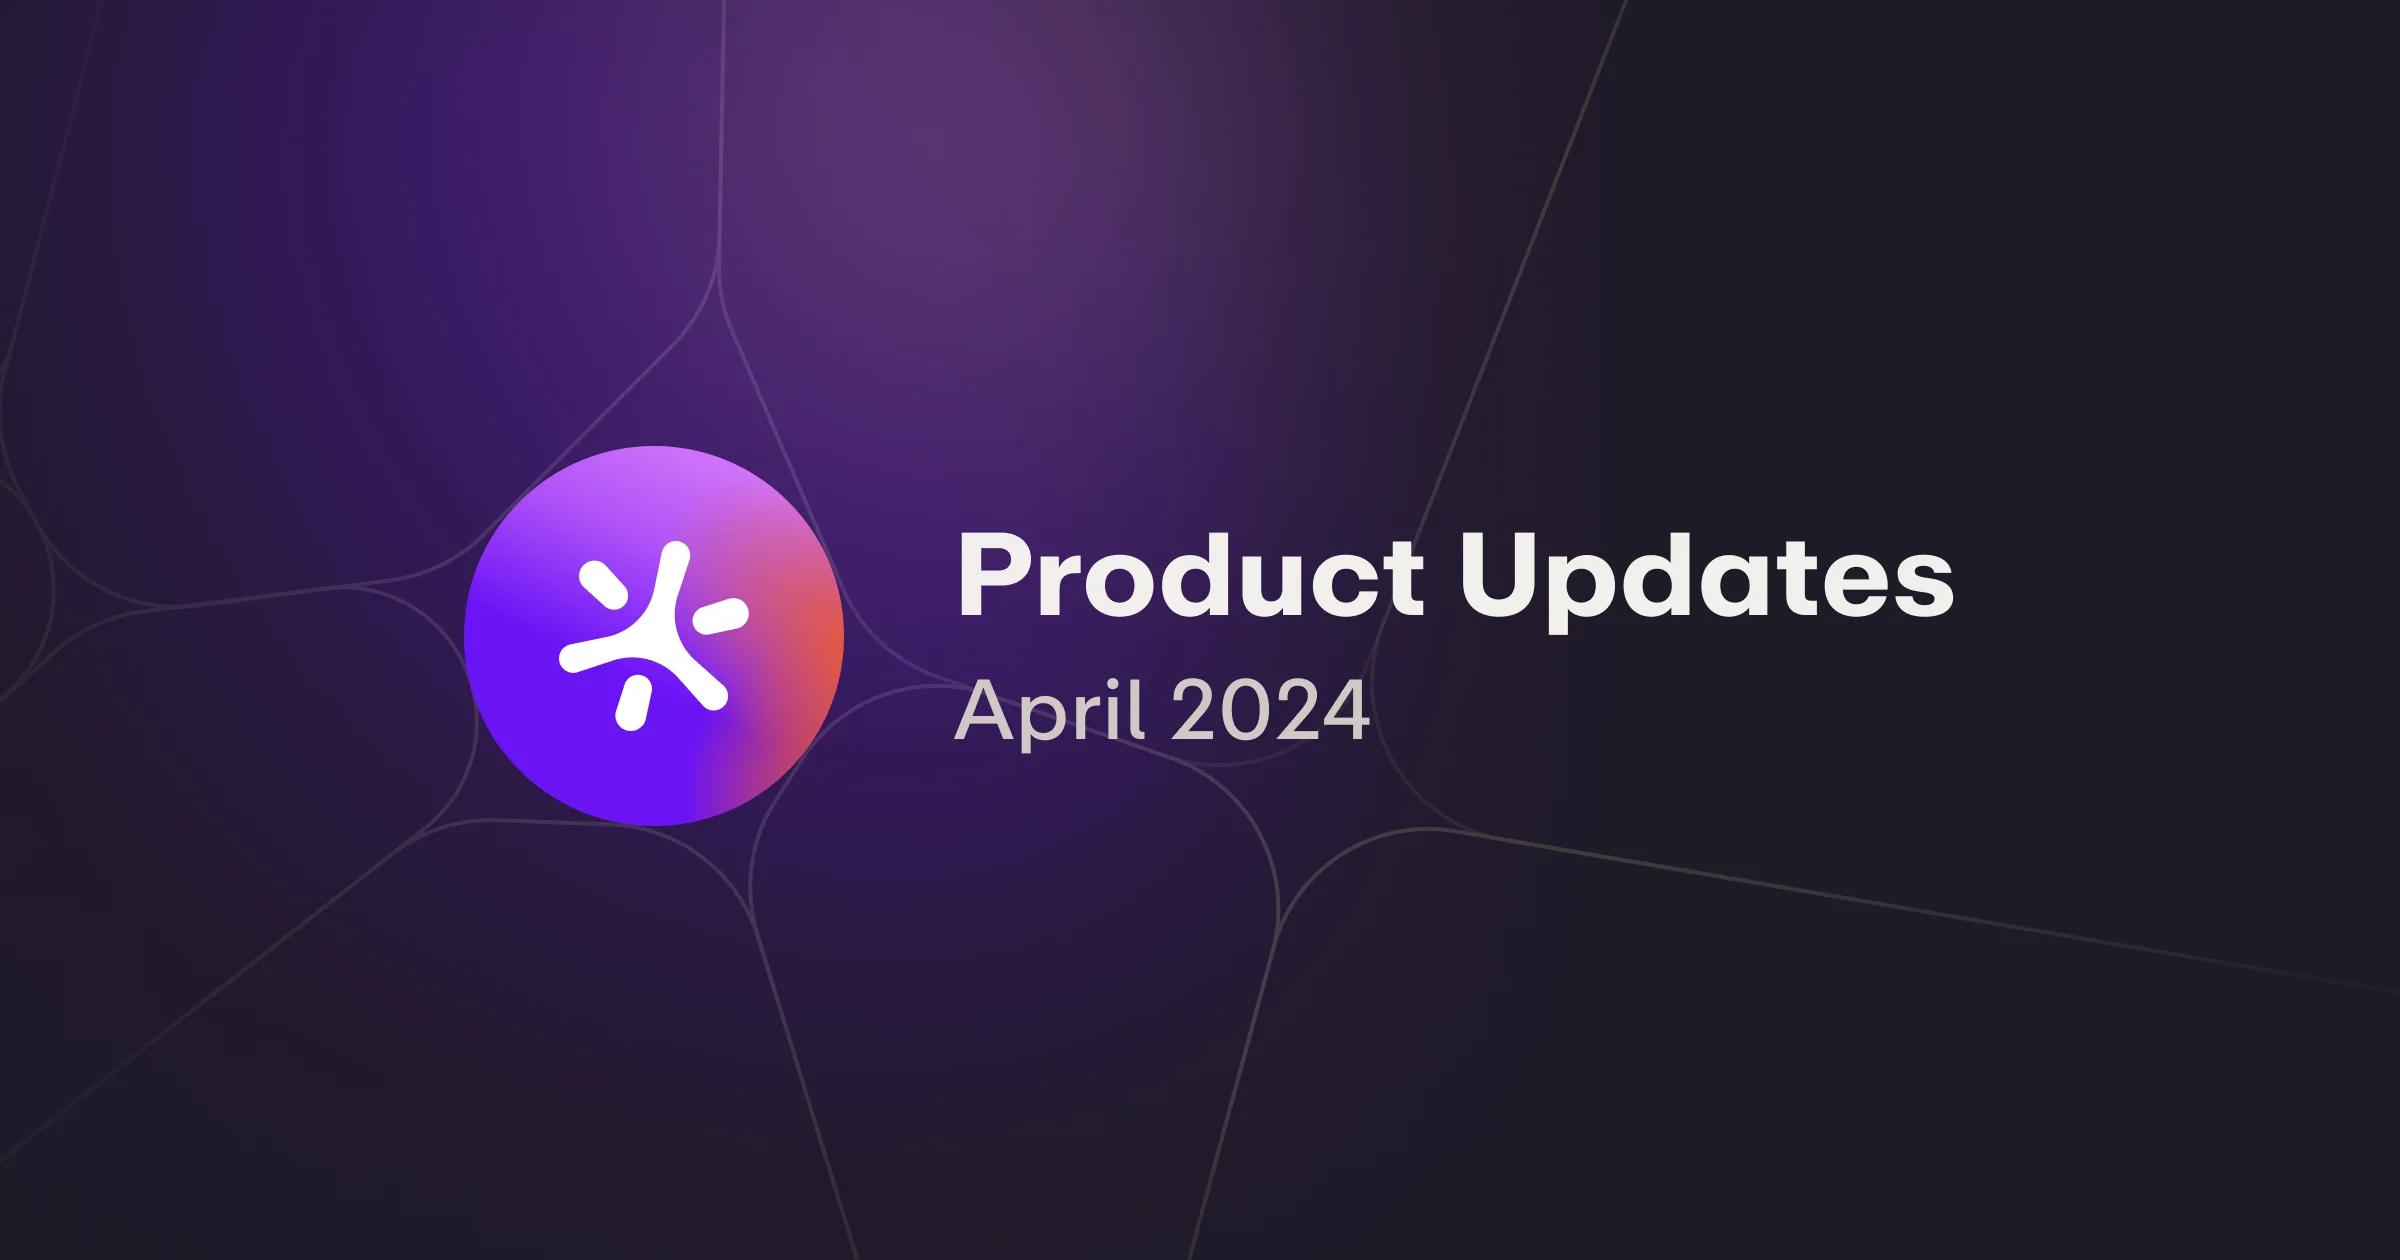 April '24 Product Update